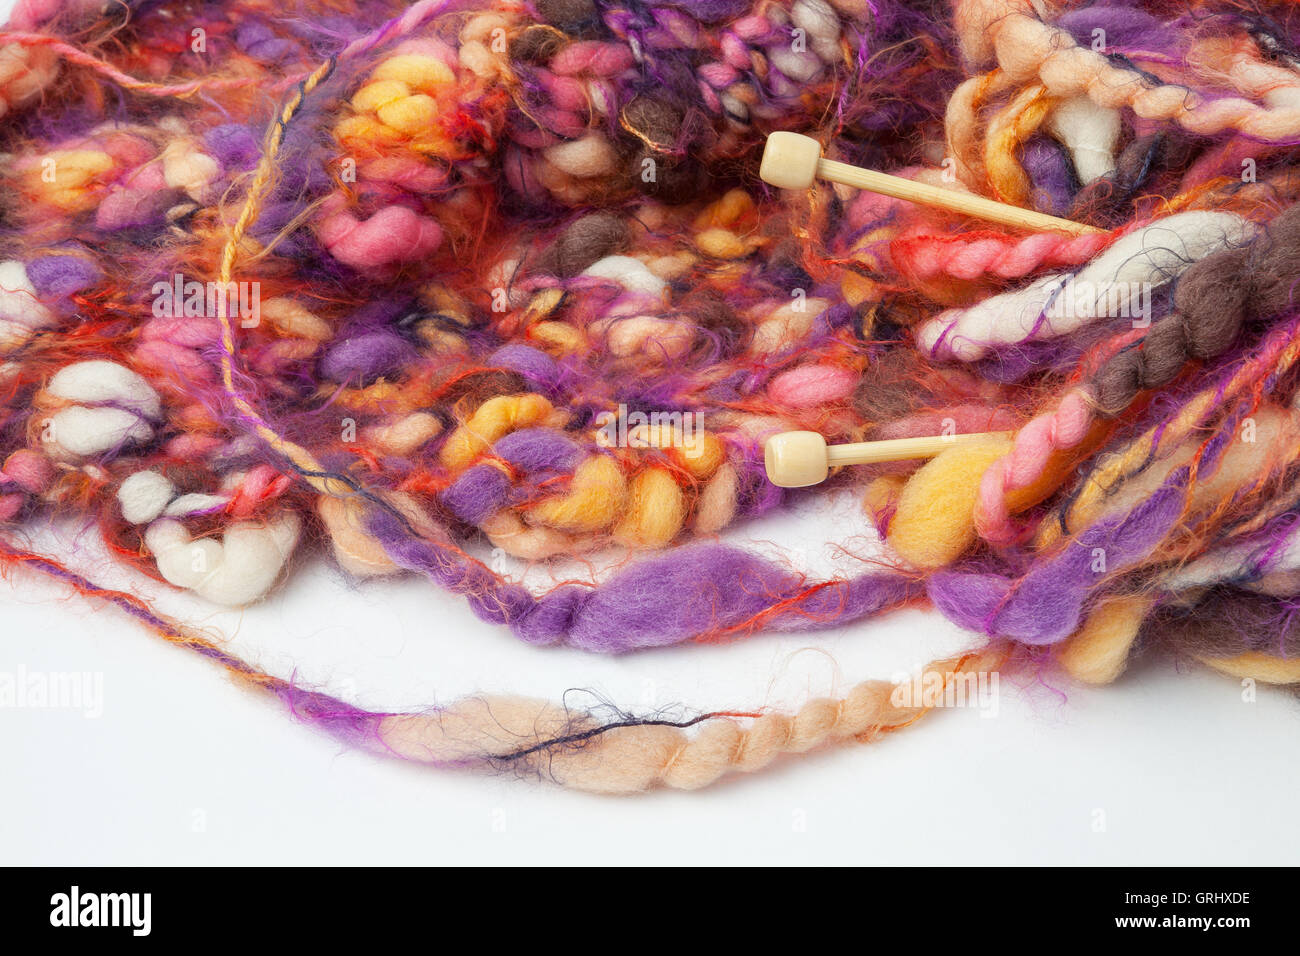 Image of colorful mohair yarn and needles. Stock Photo